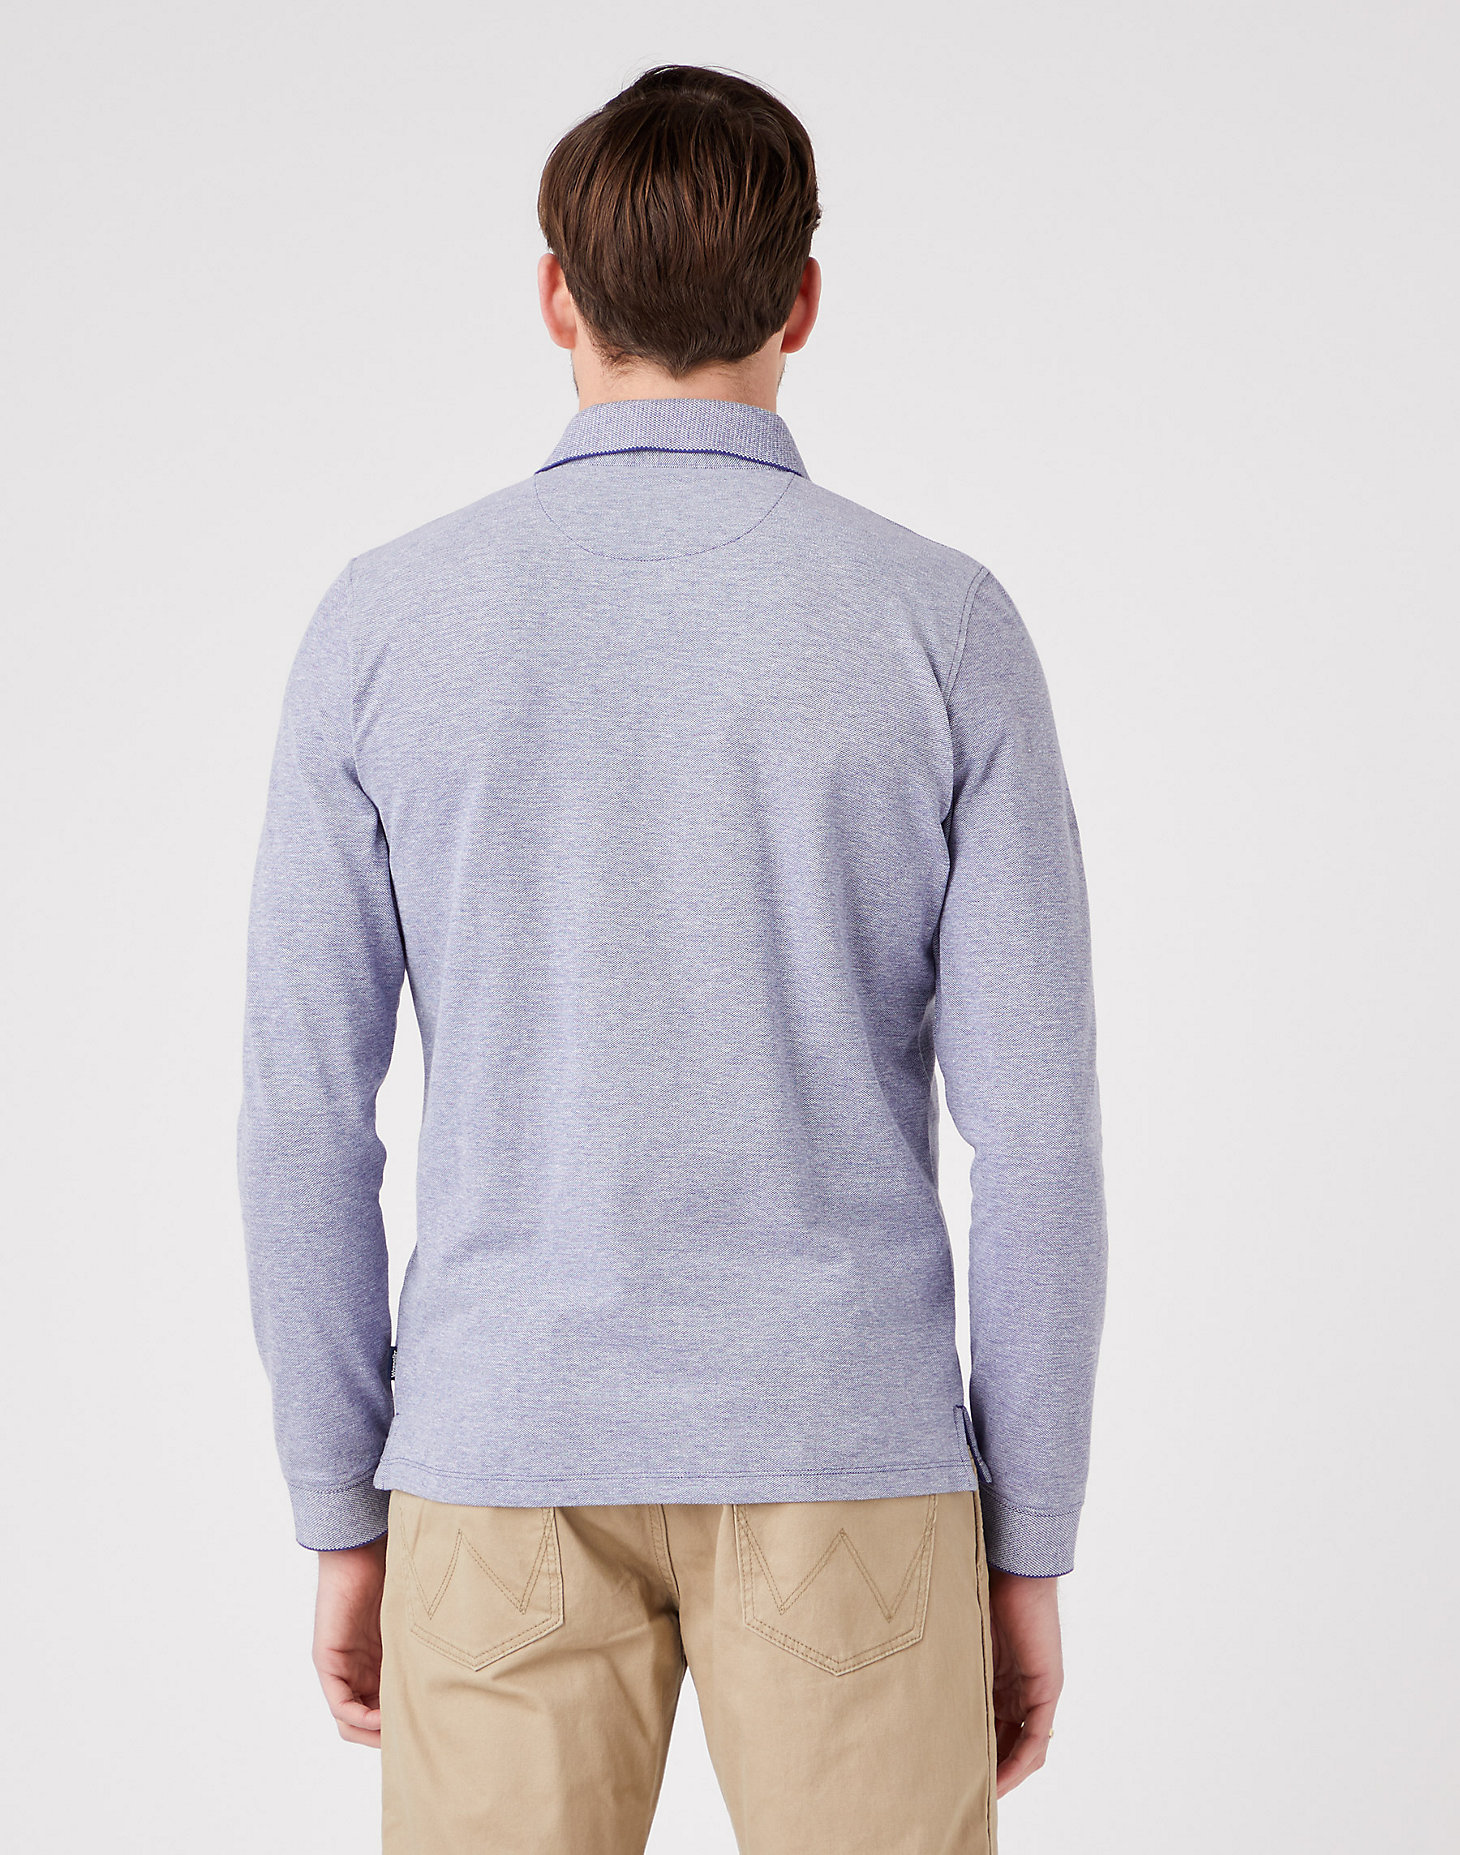 Long Sleeve Refined Polo in Blue Ribbon alternative view 2